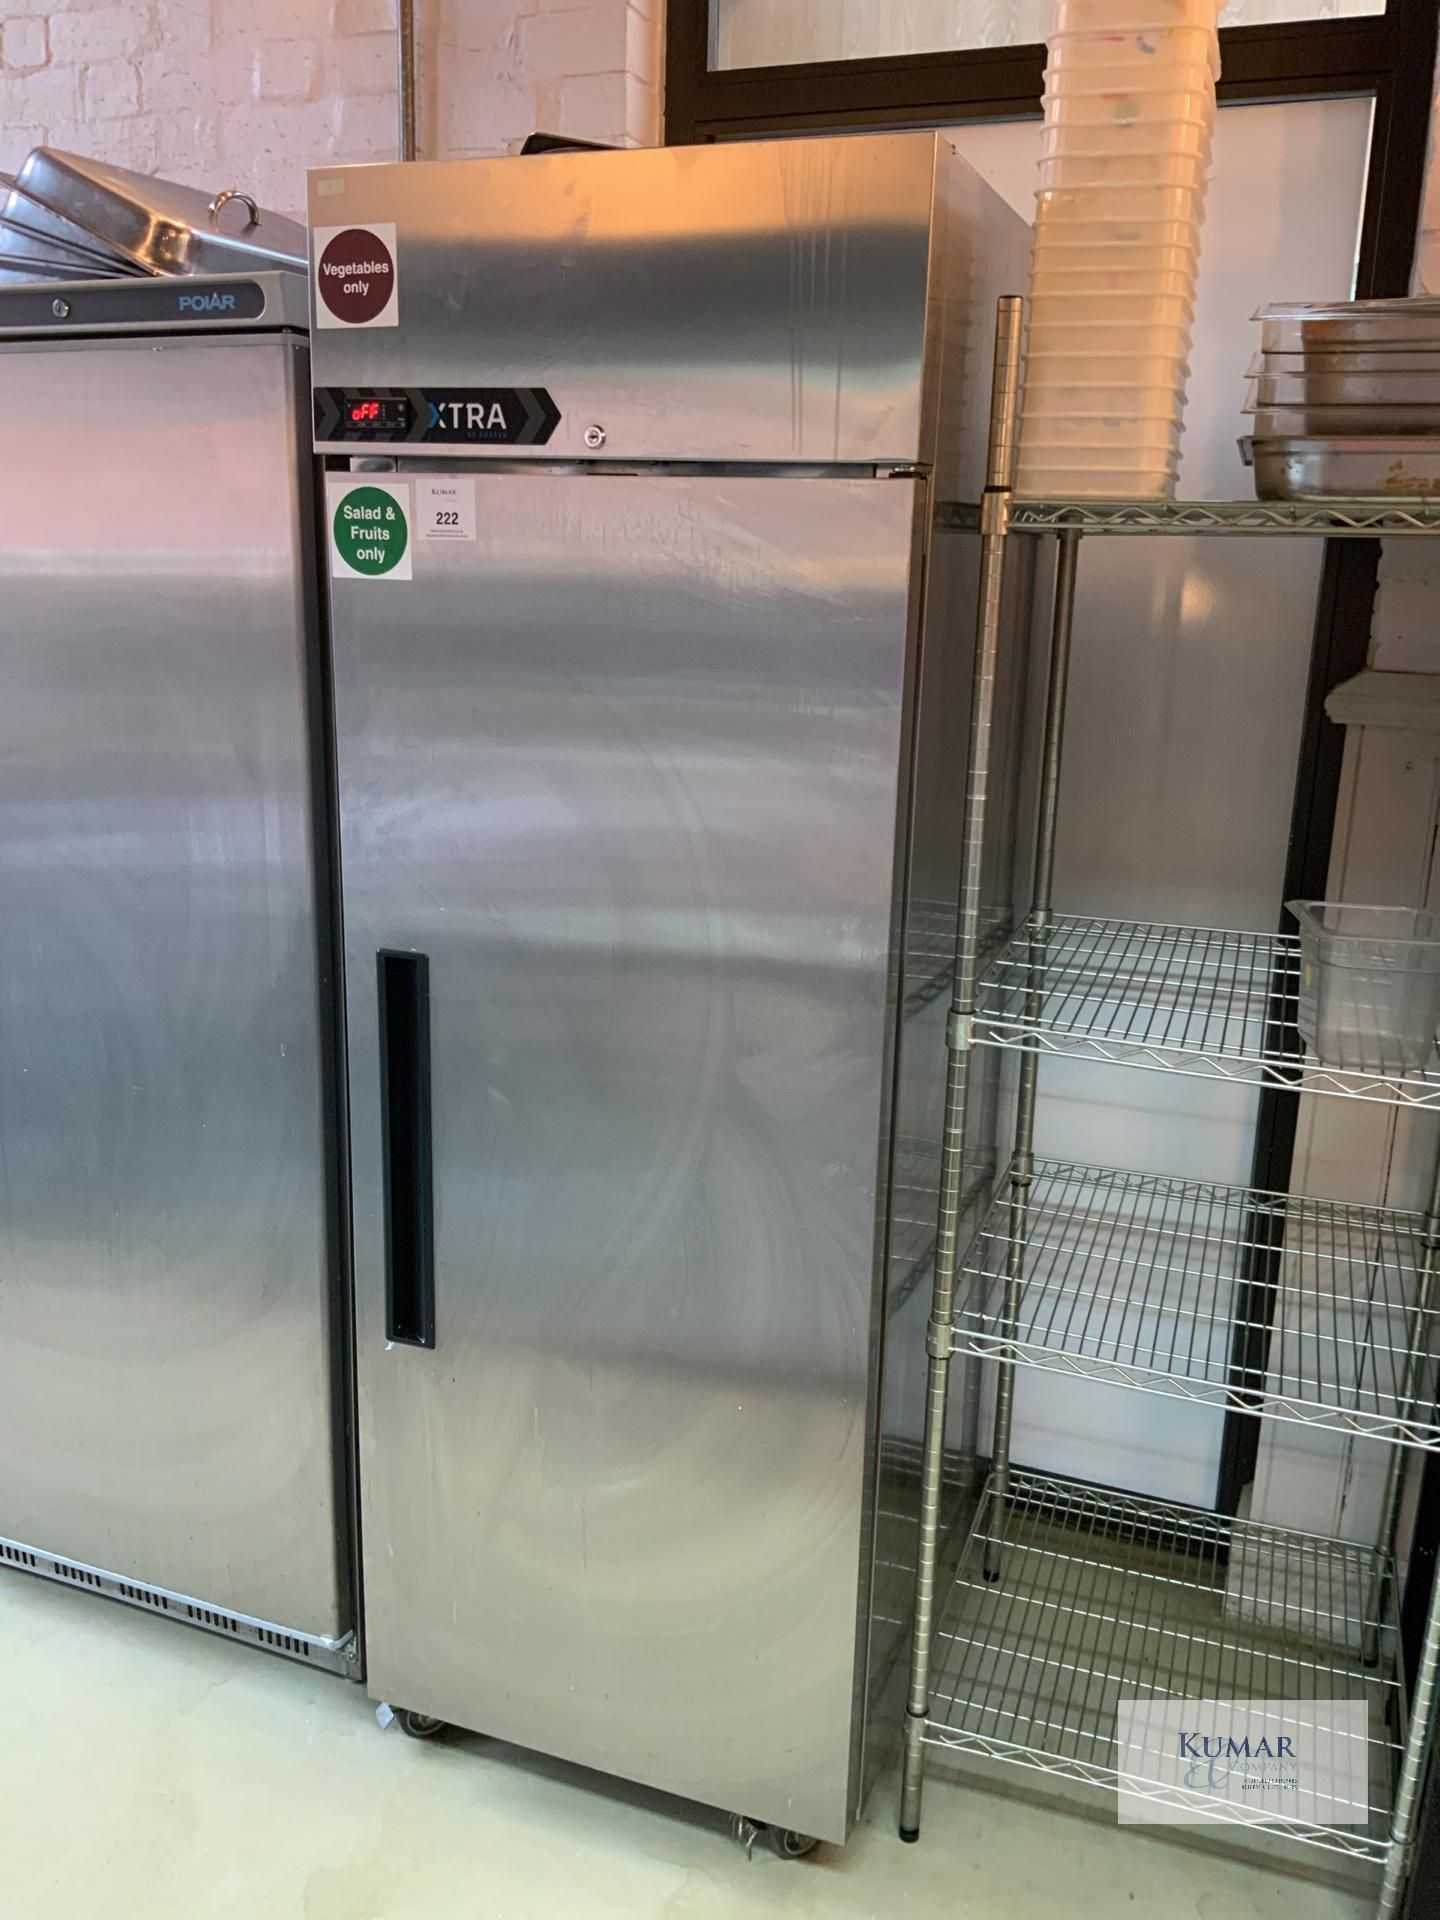 Foster Xtra Stainless Steel Upright Refrigerator. Please Note - This lot is located at Hengata